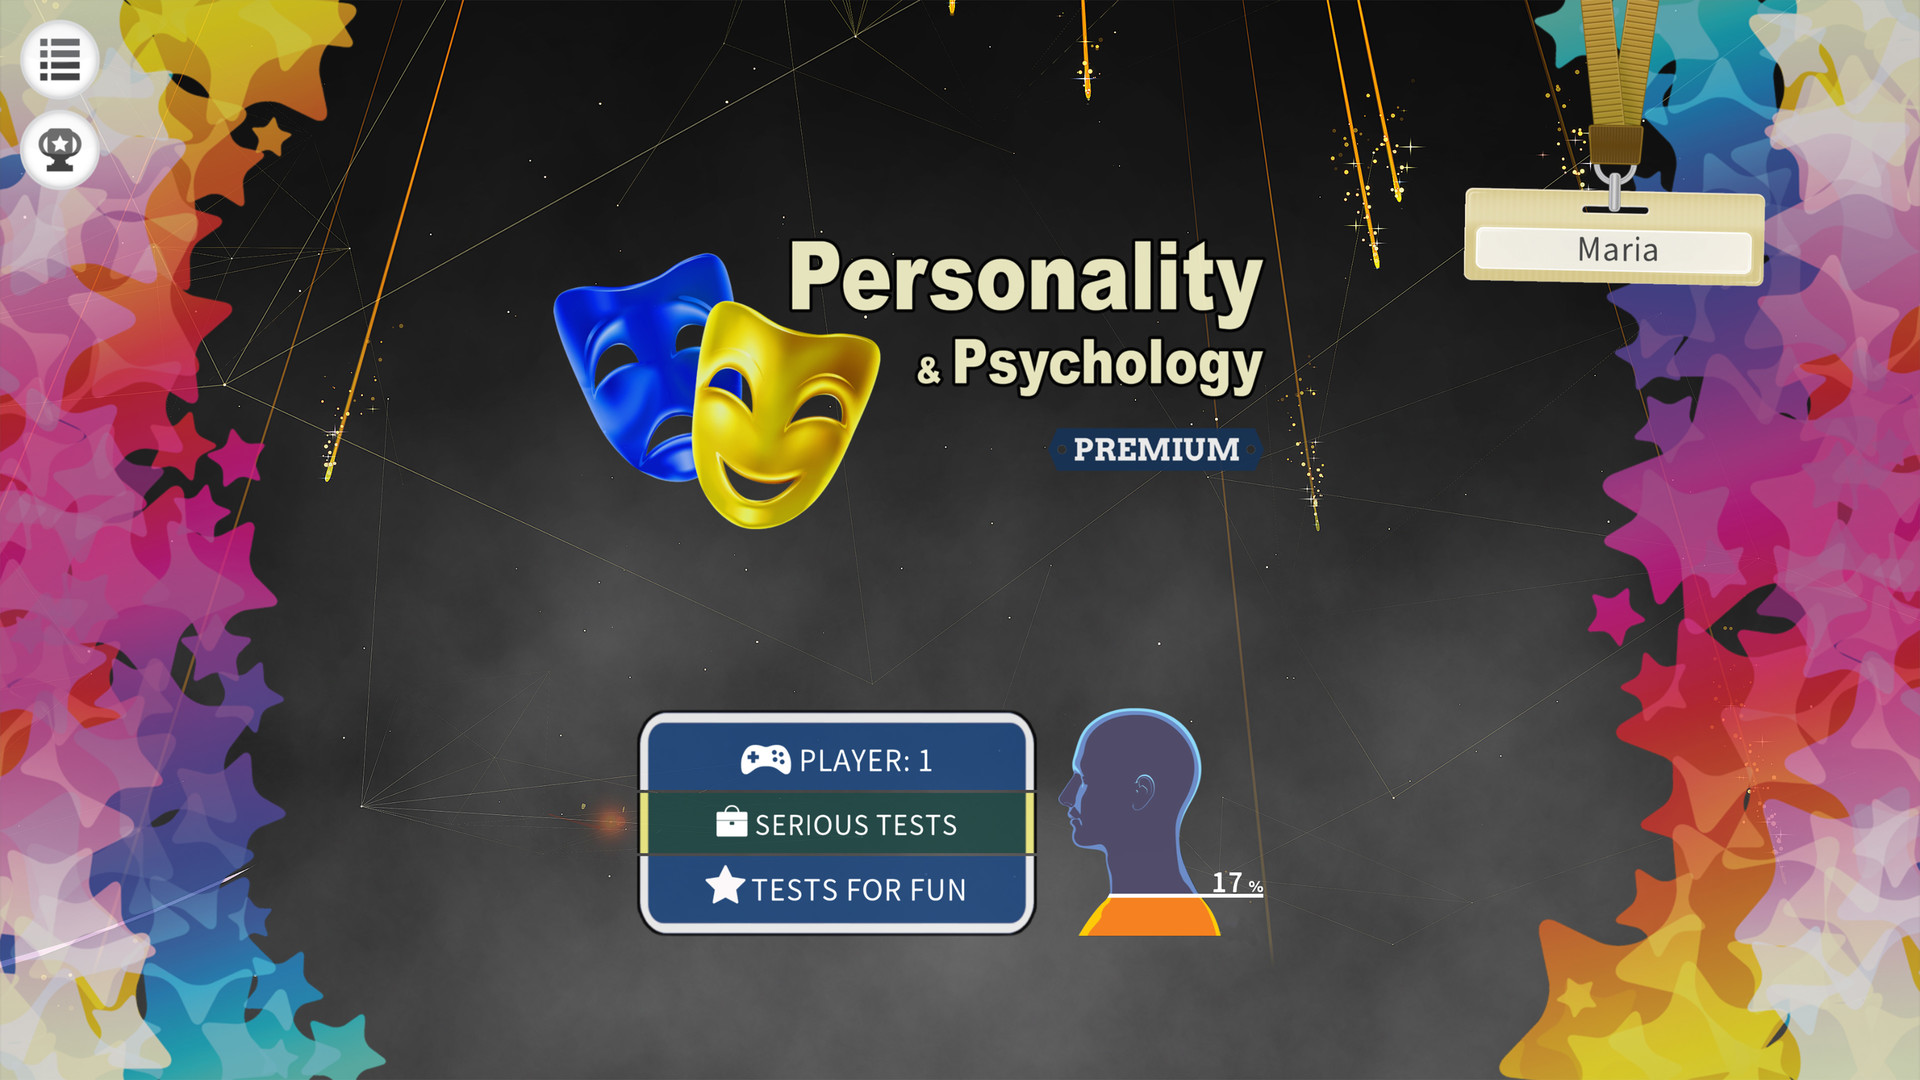 Personality Psychology Premium on Steam